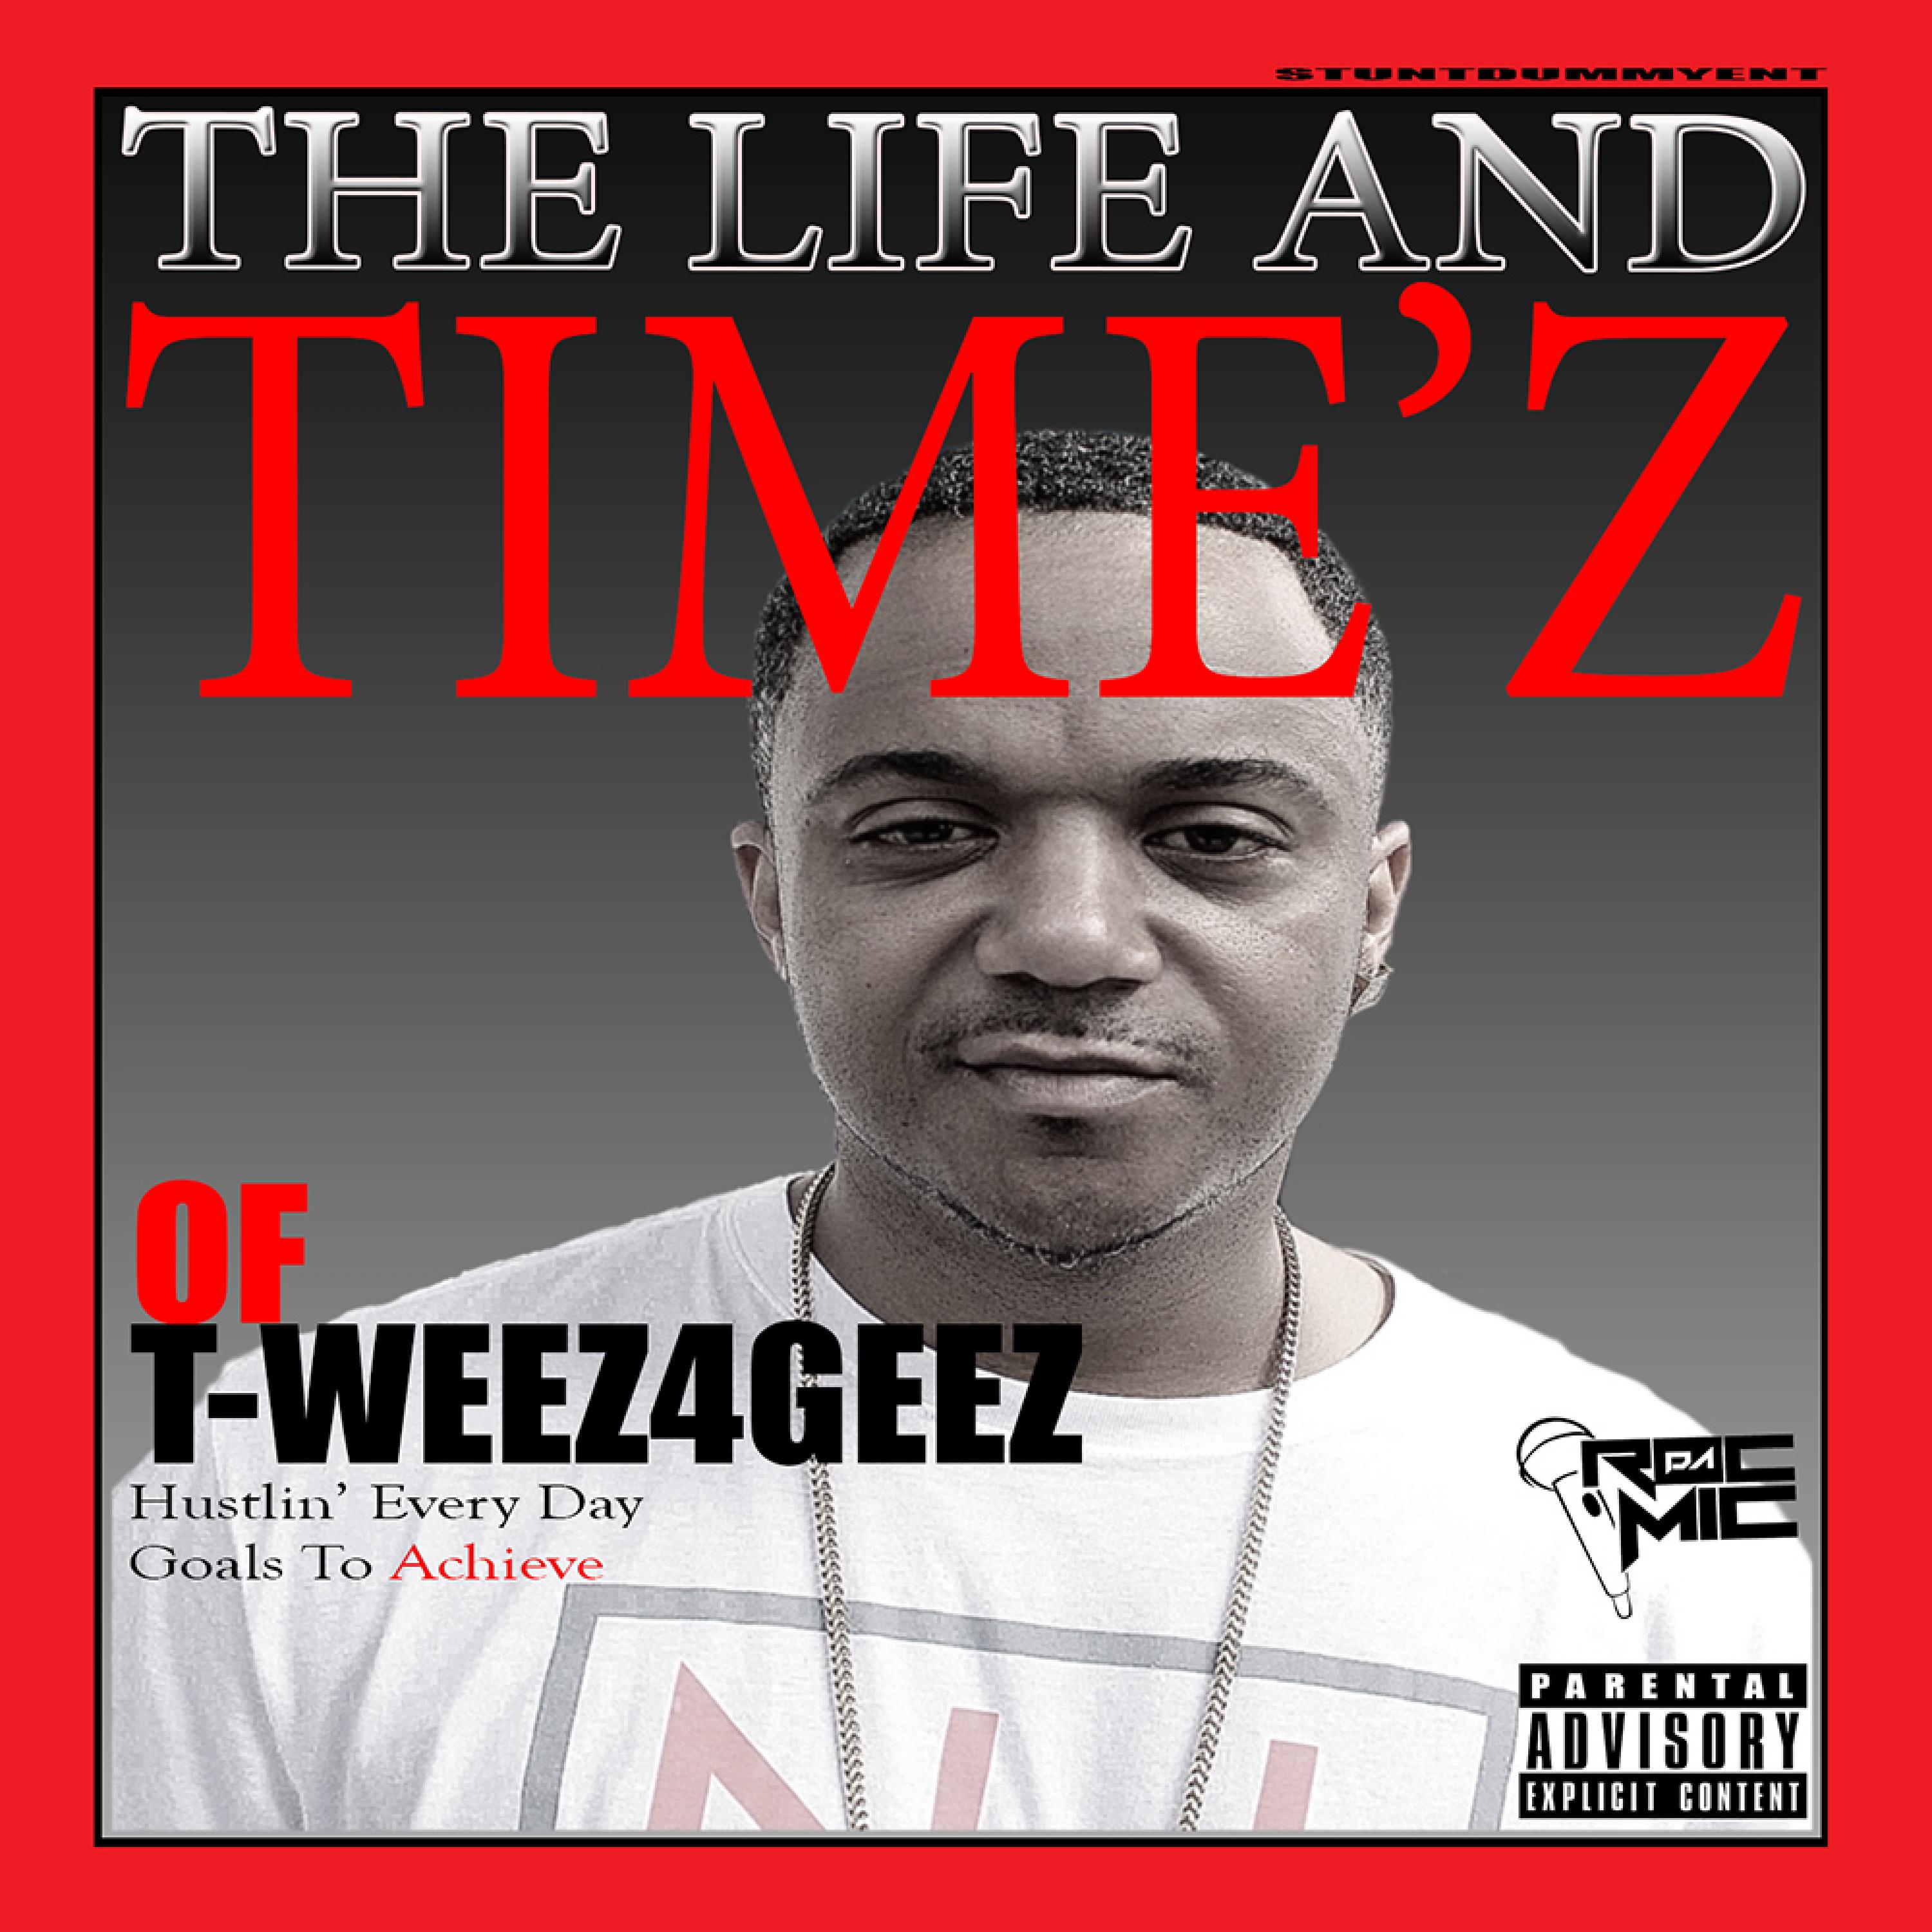 The Life and Timez of T-Weez4Geez